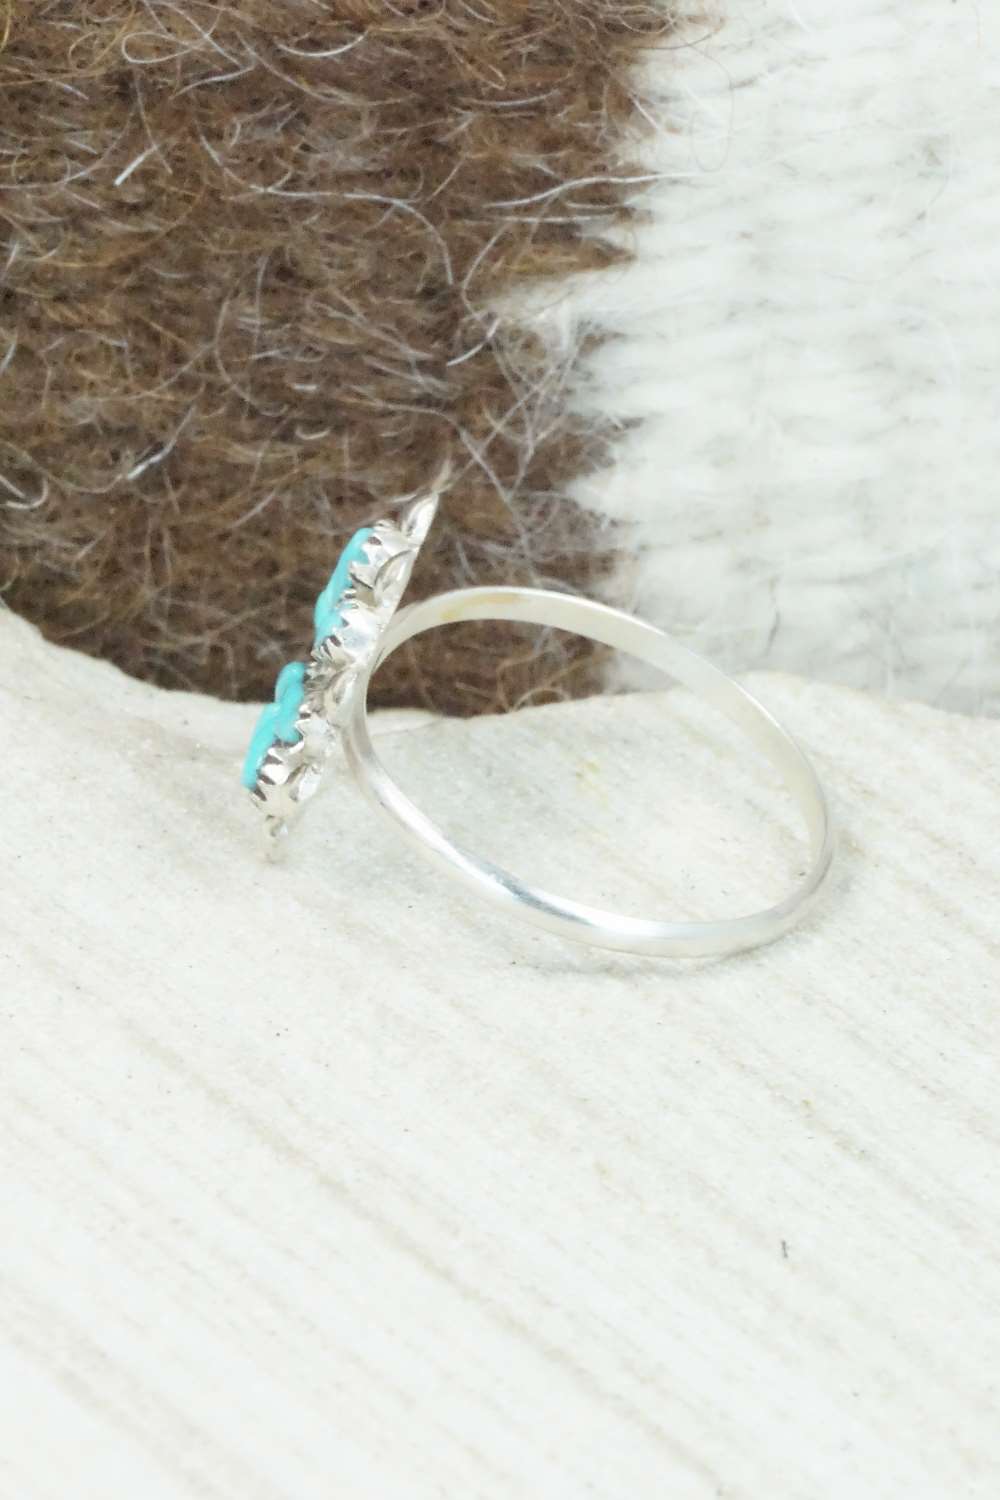 Turquoise & Sterling Silver Ring - David Leekity - Size 8.75